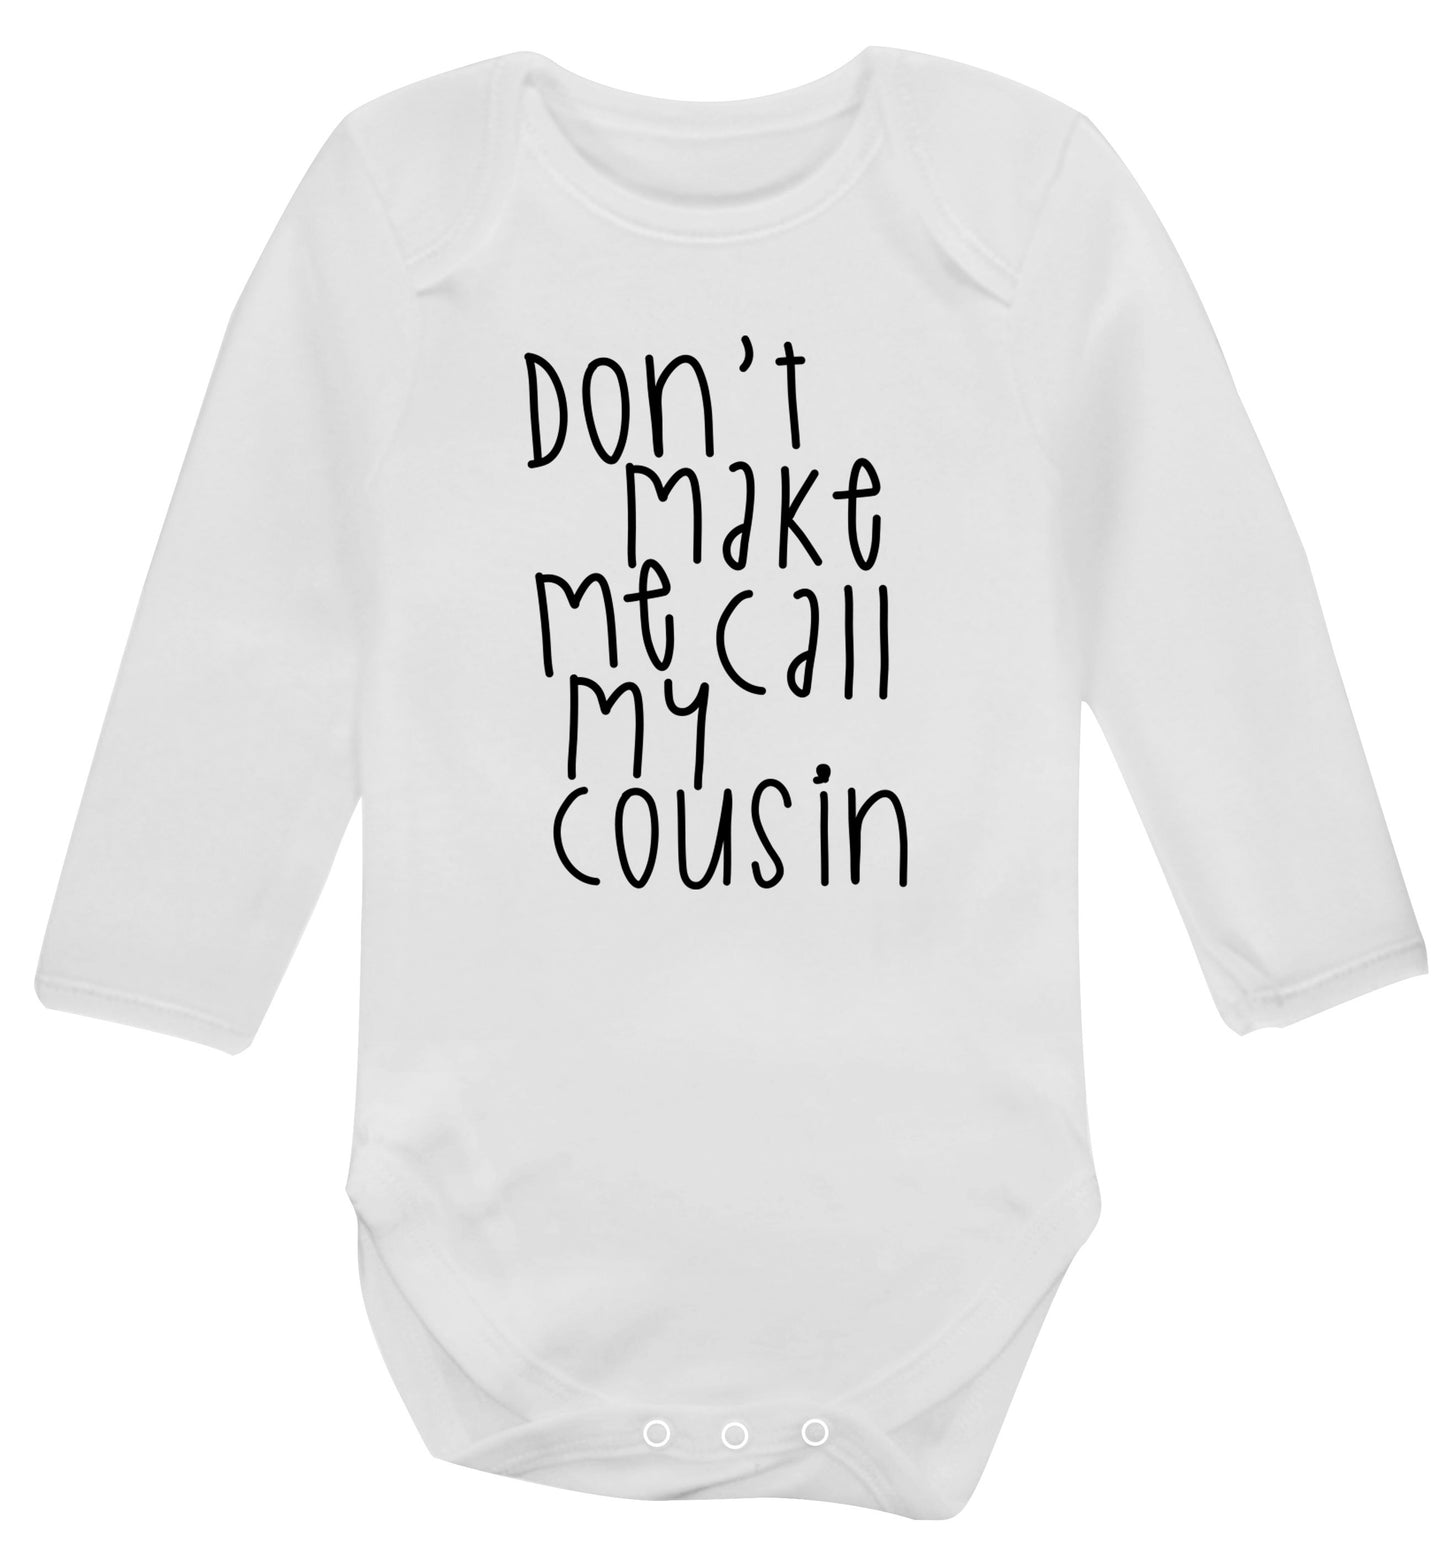 Don't make me call my cousin Baby Vest long sleeved white 6-12 months